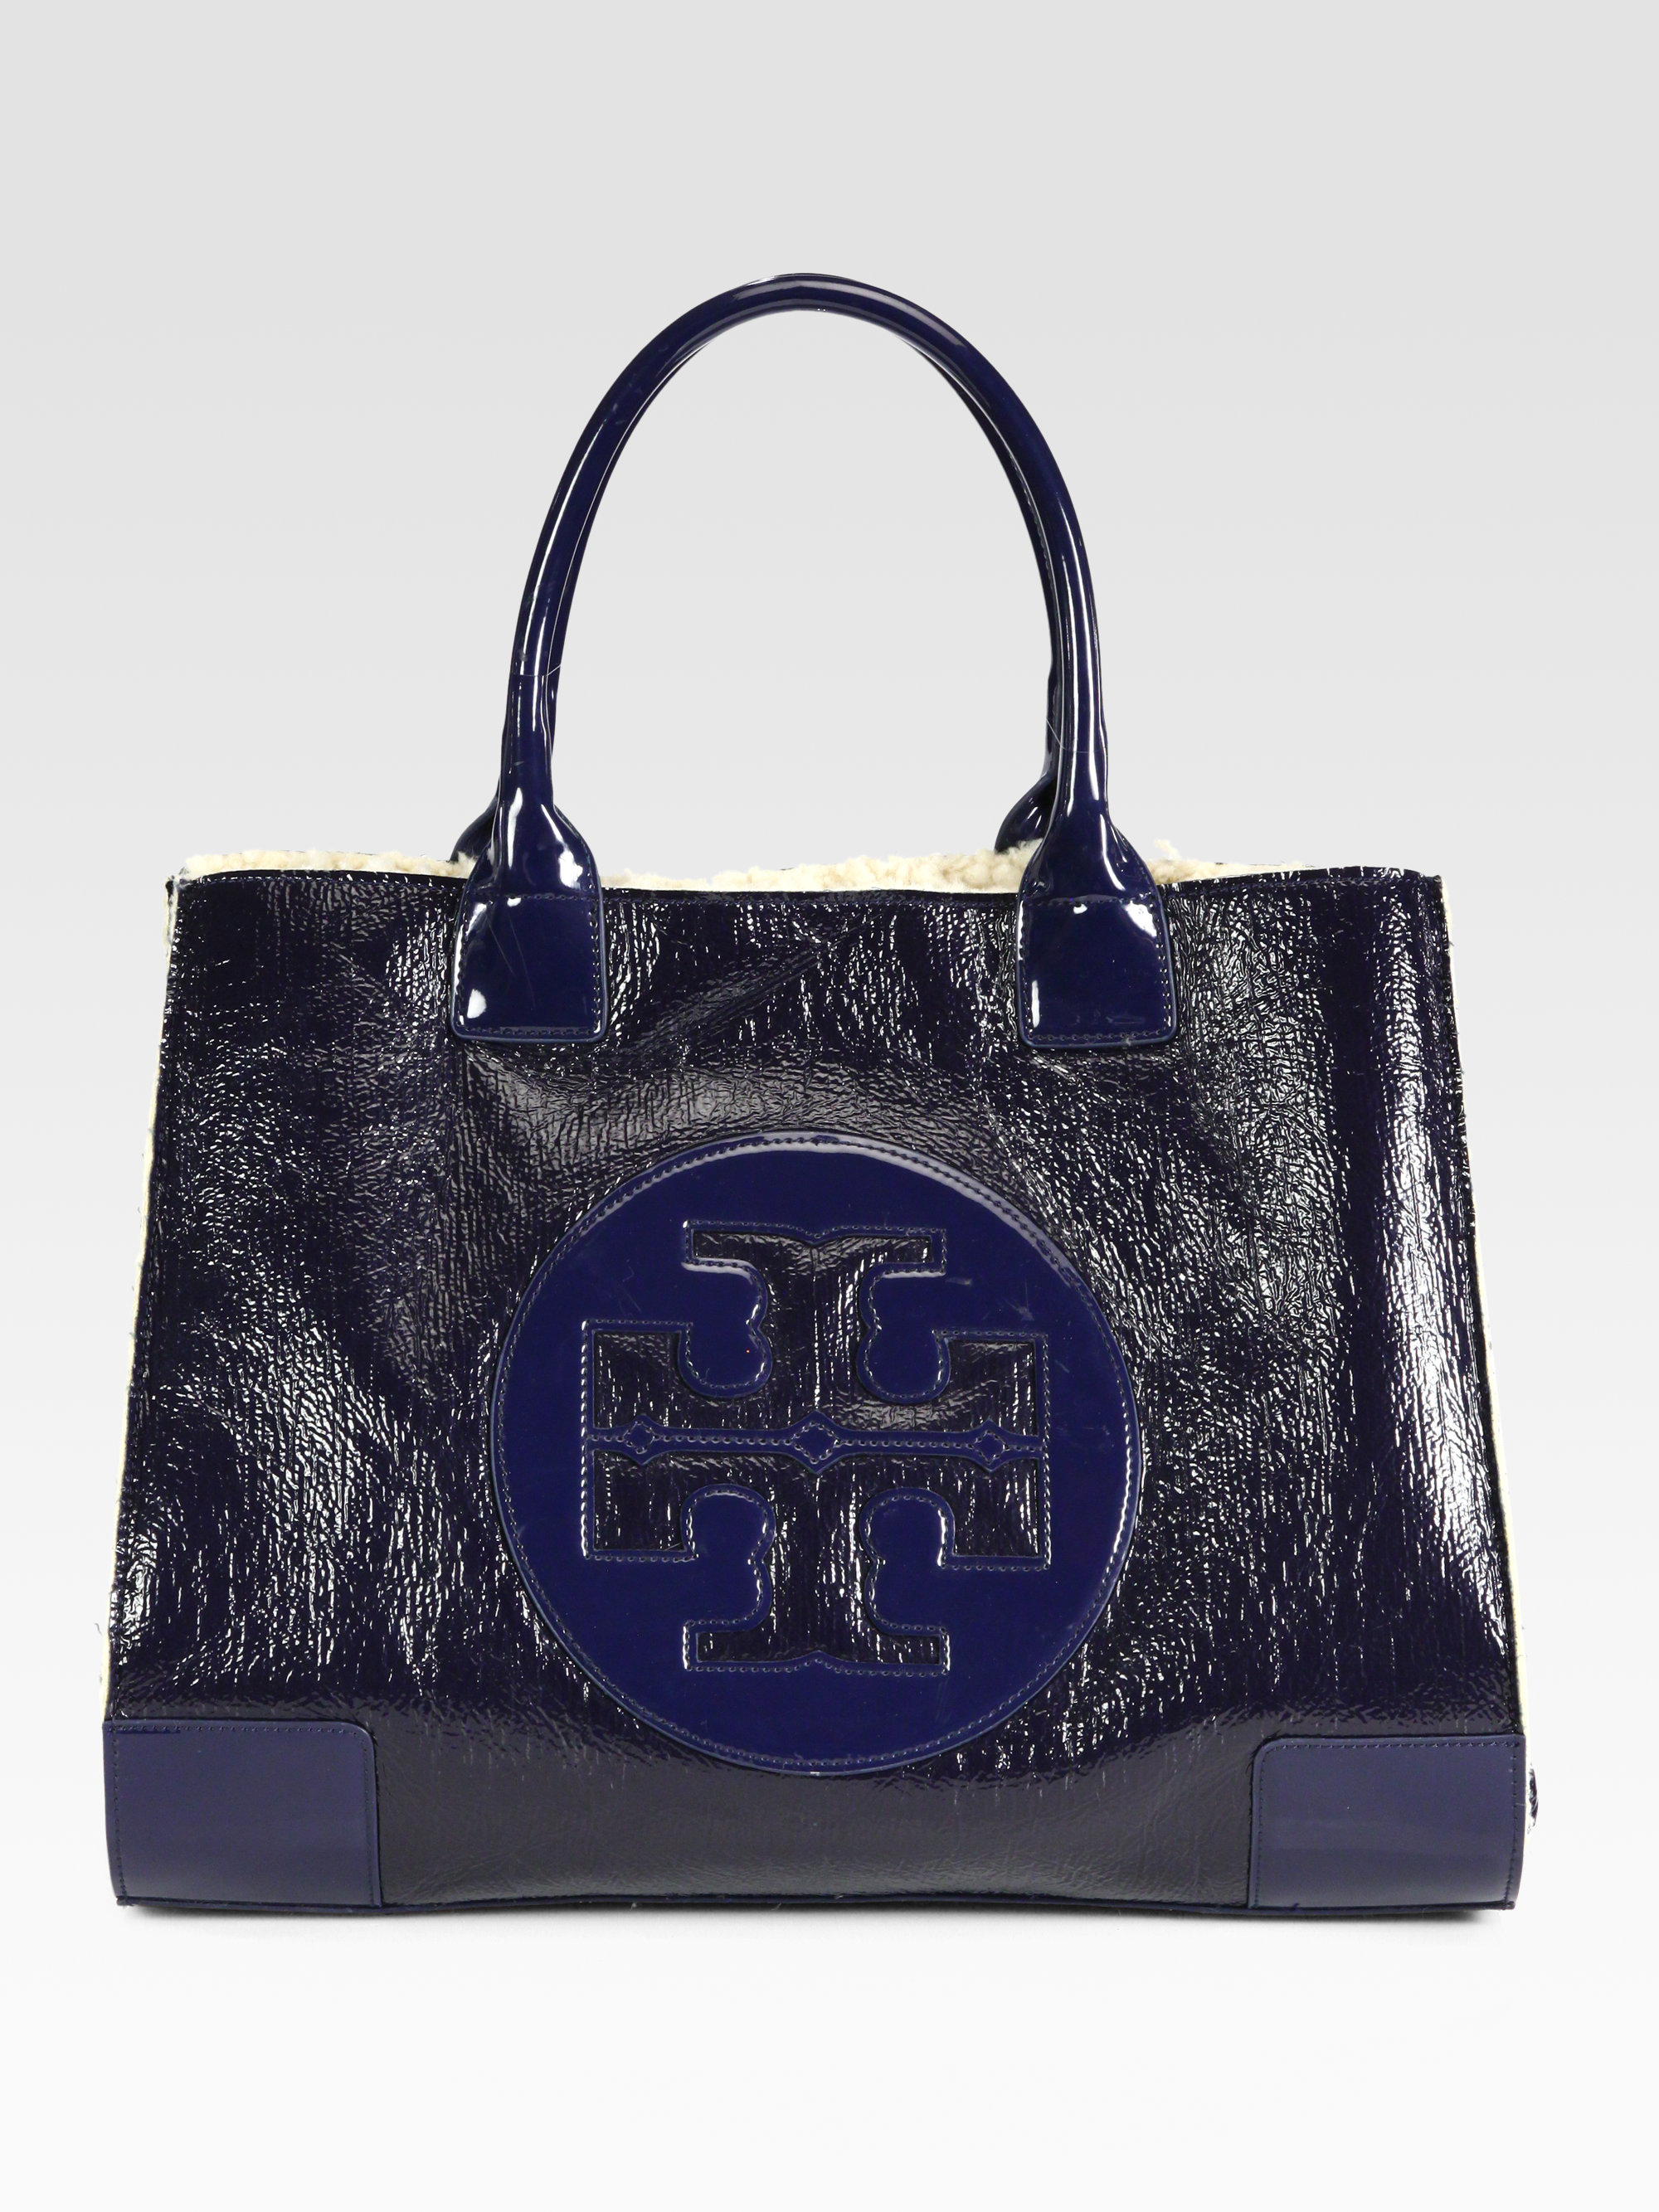 Lyst - Tory Burch Normandy Embossed Patent Leather Ella Tote in Blue